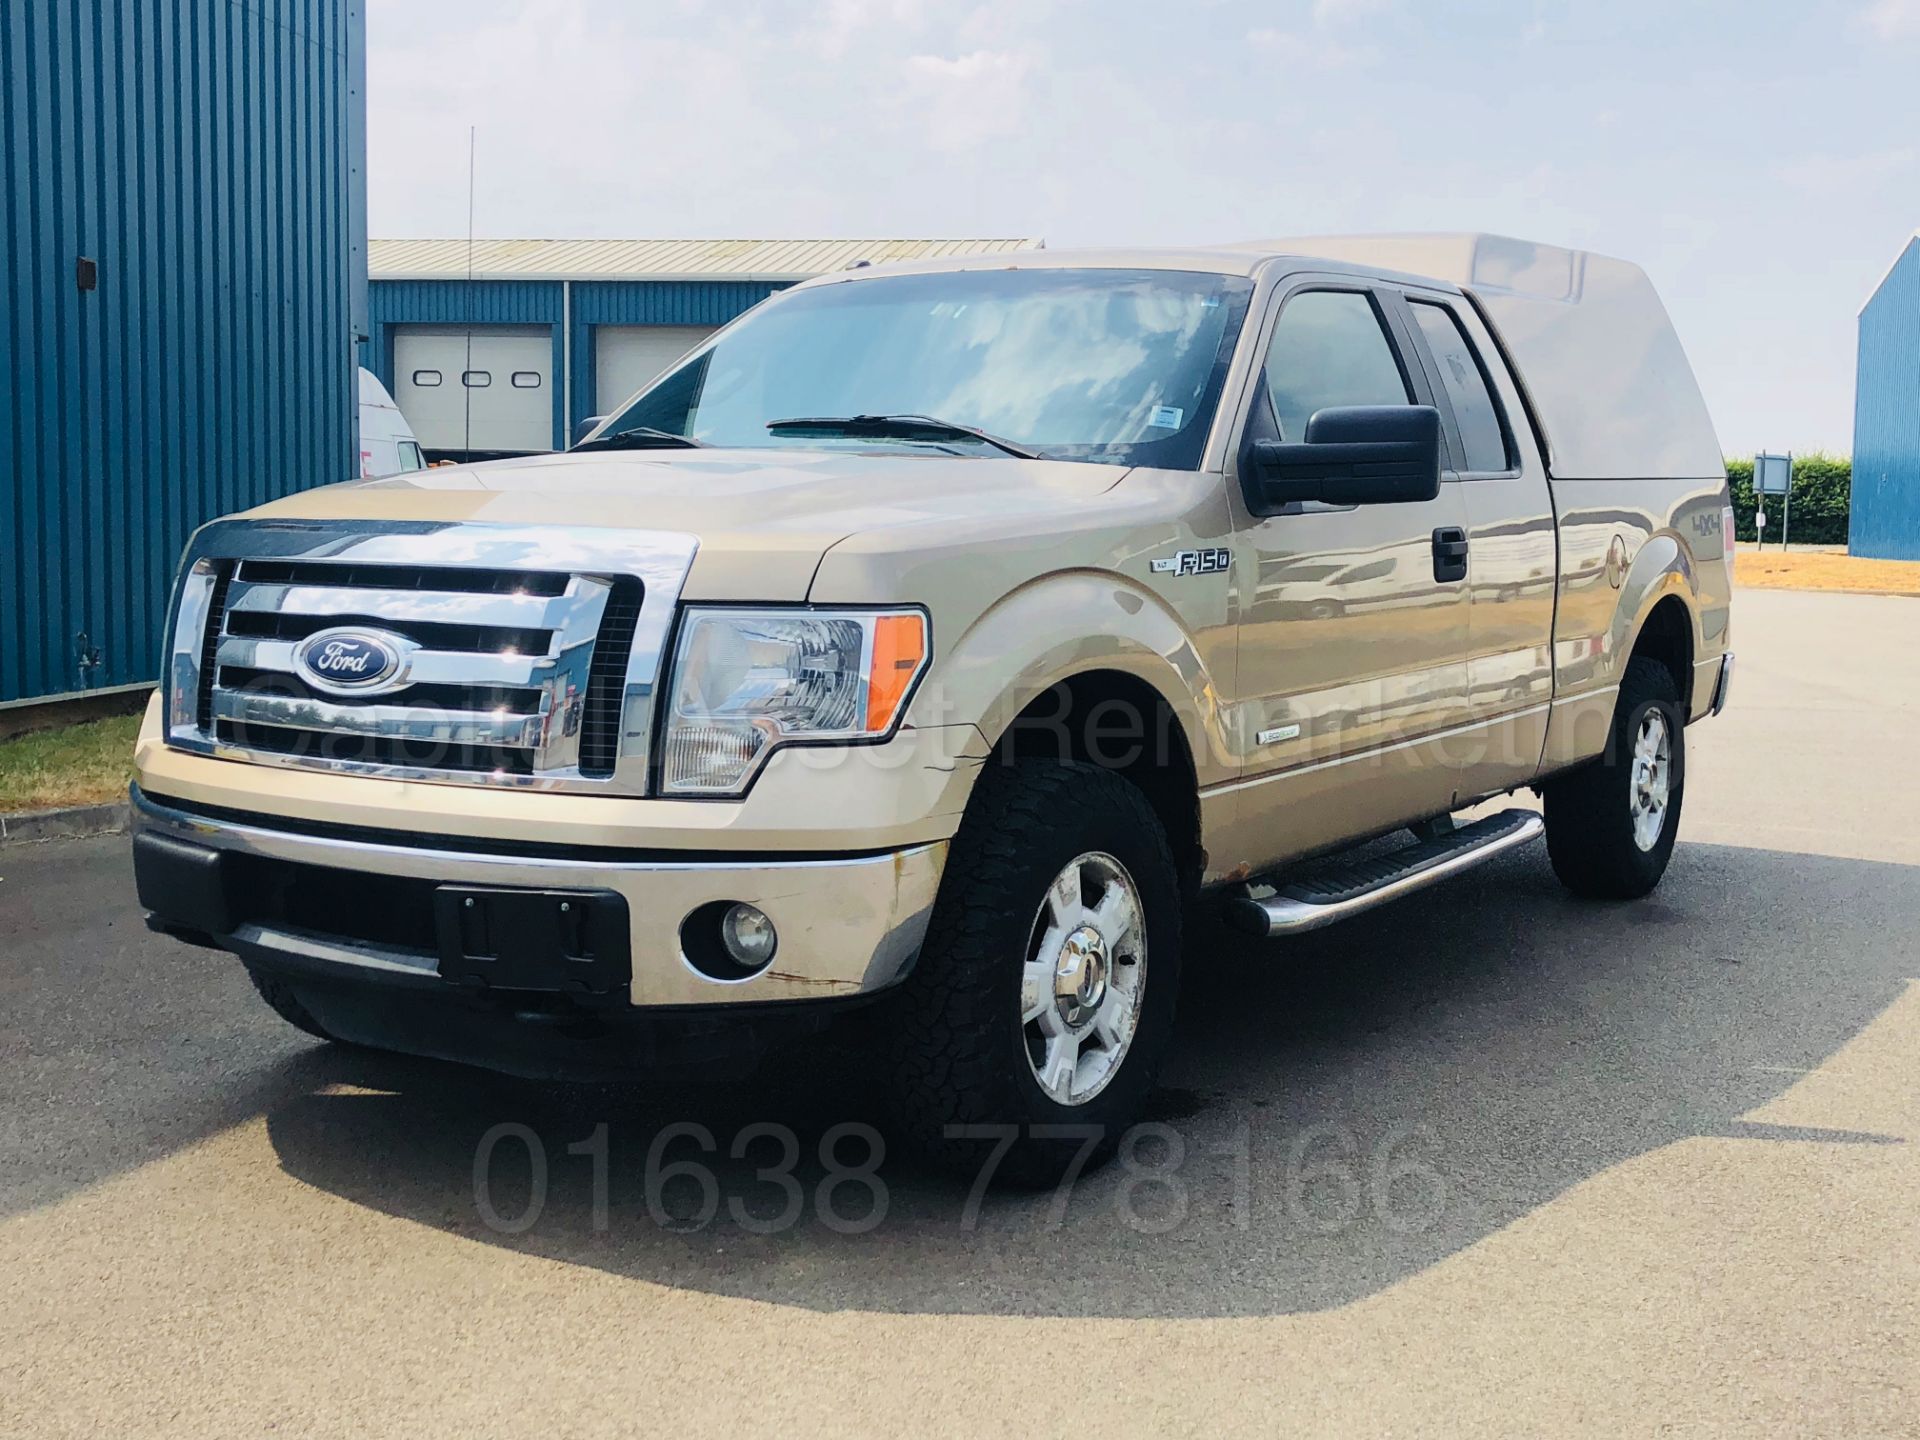 (On Sale) FORD F-150 5.4 V8 XLT EDITION KING-CAB (2012) MODEL**4X4**6 SEATER**AUTOMATIC *TOP SPEC* - Bild 8 aus 52